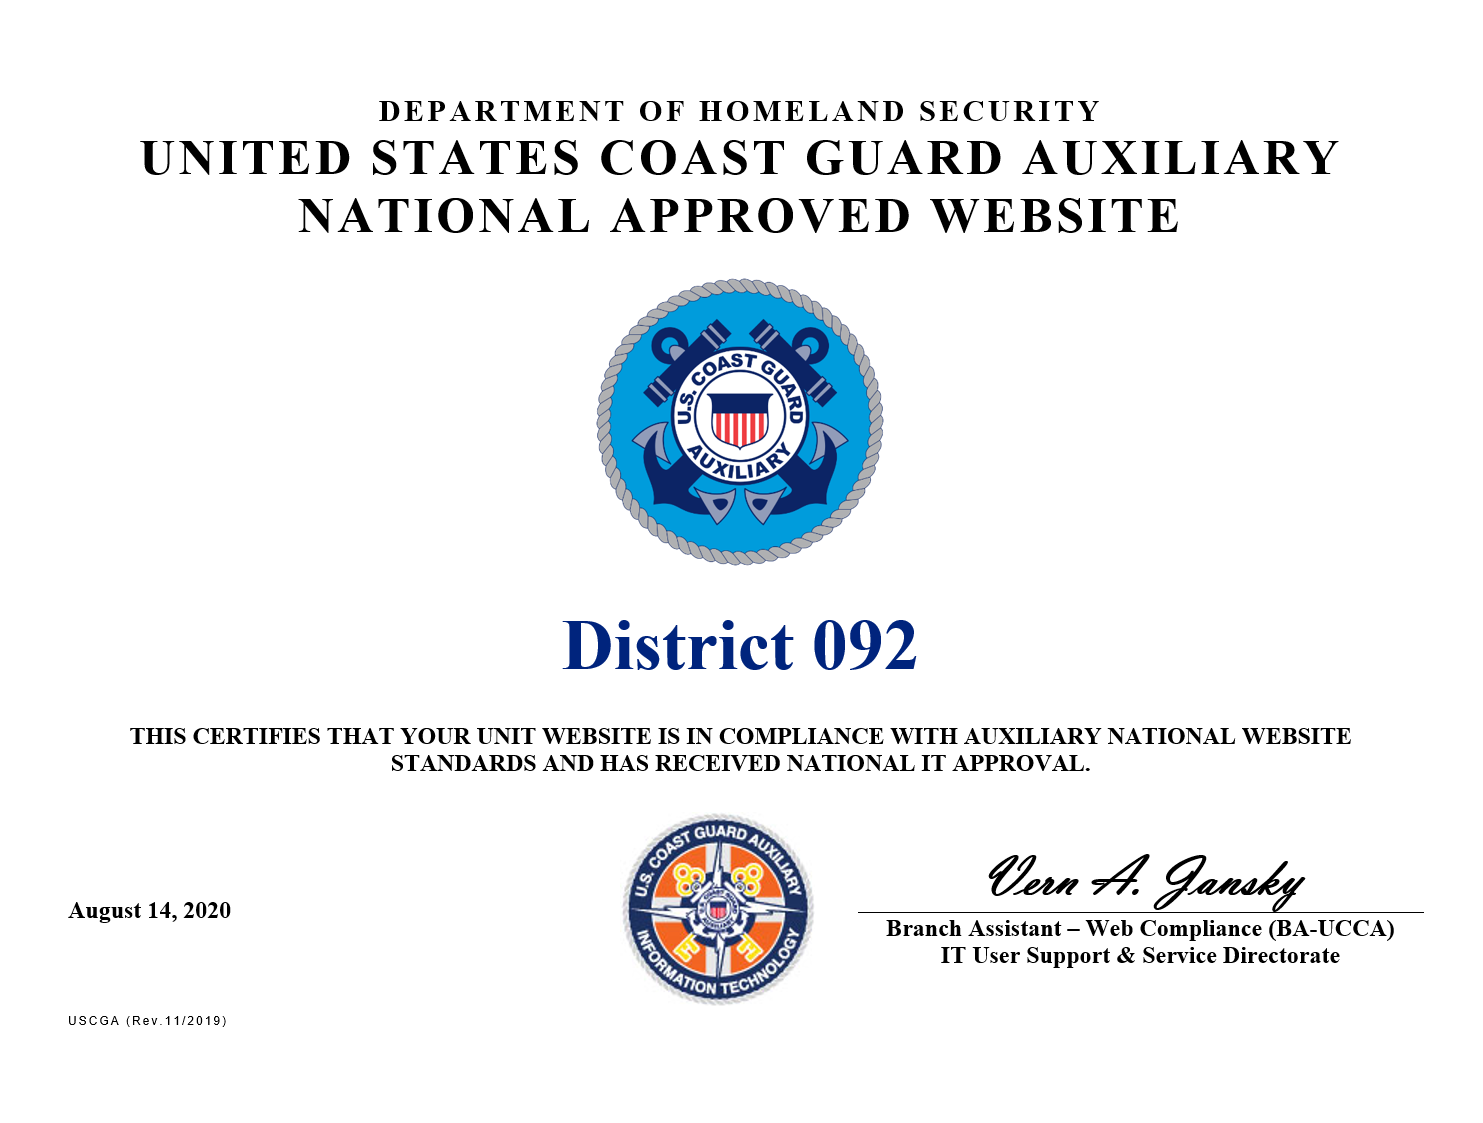 Approved website certificate